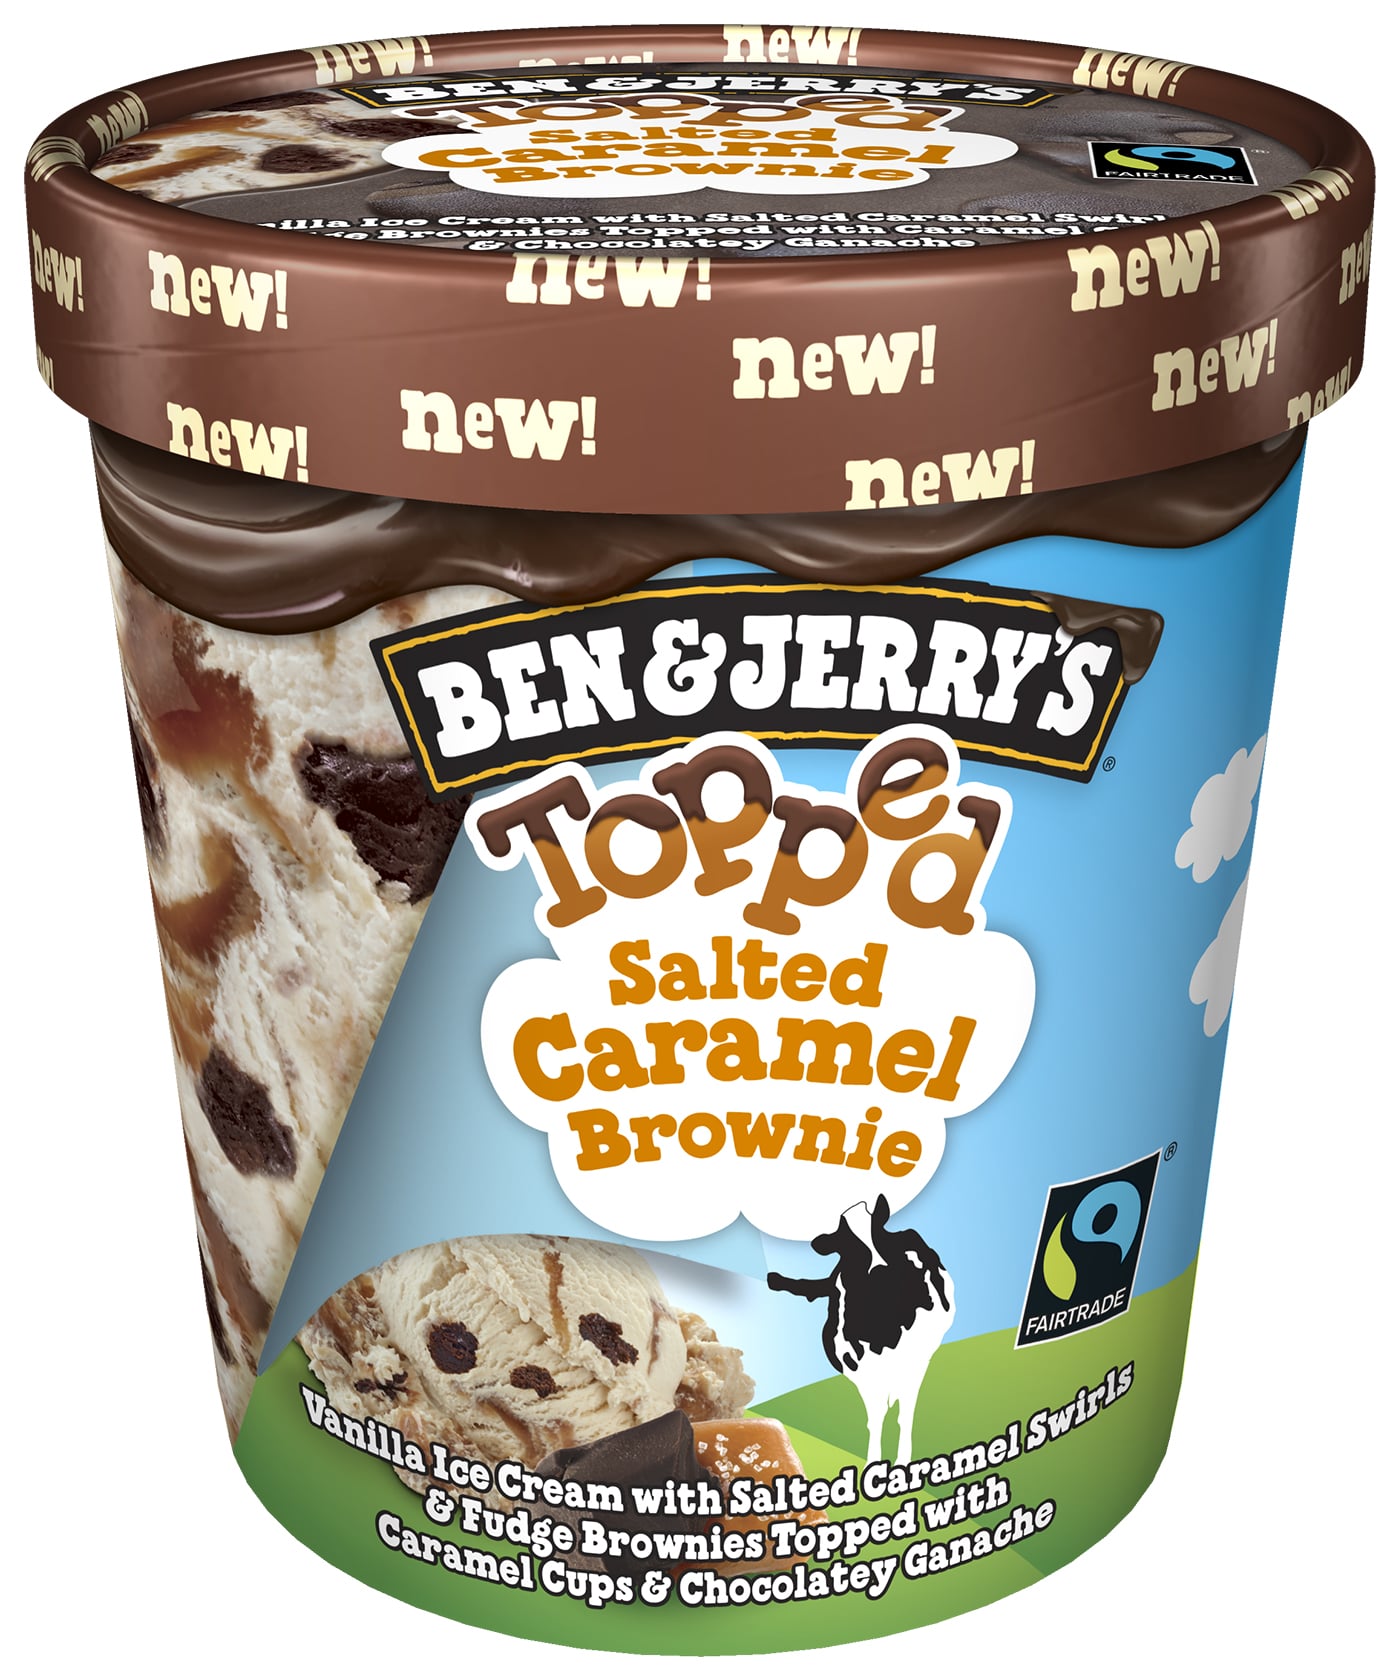 Ben & Jerry's Topped Salted Caramel Brownie Ice Cream | Oh My Sundae! Ben & Jerry's Ice Creams Are Covered in a Thick Layer of Ganache | POPSUGAR Food Photo 9